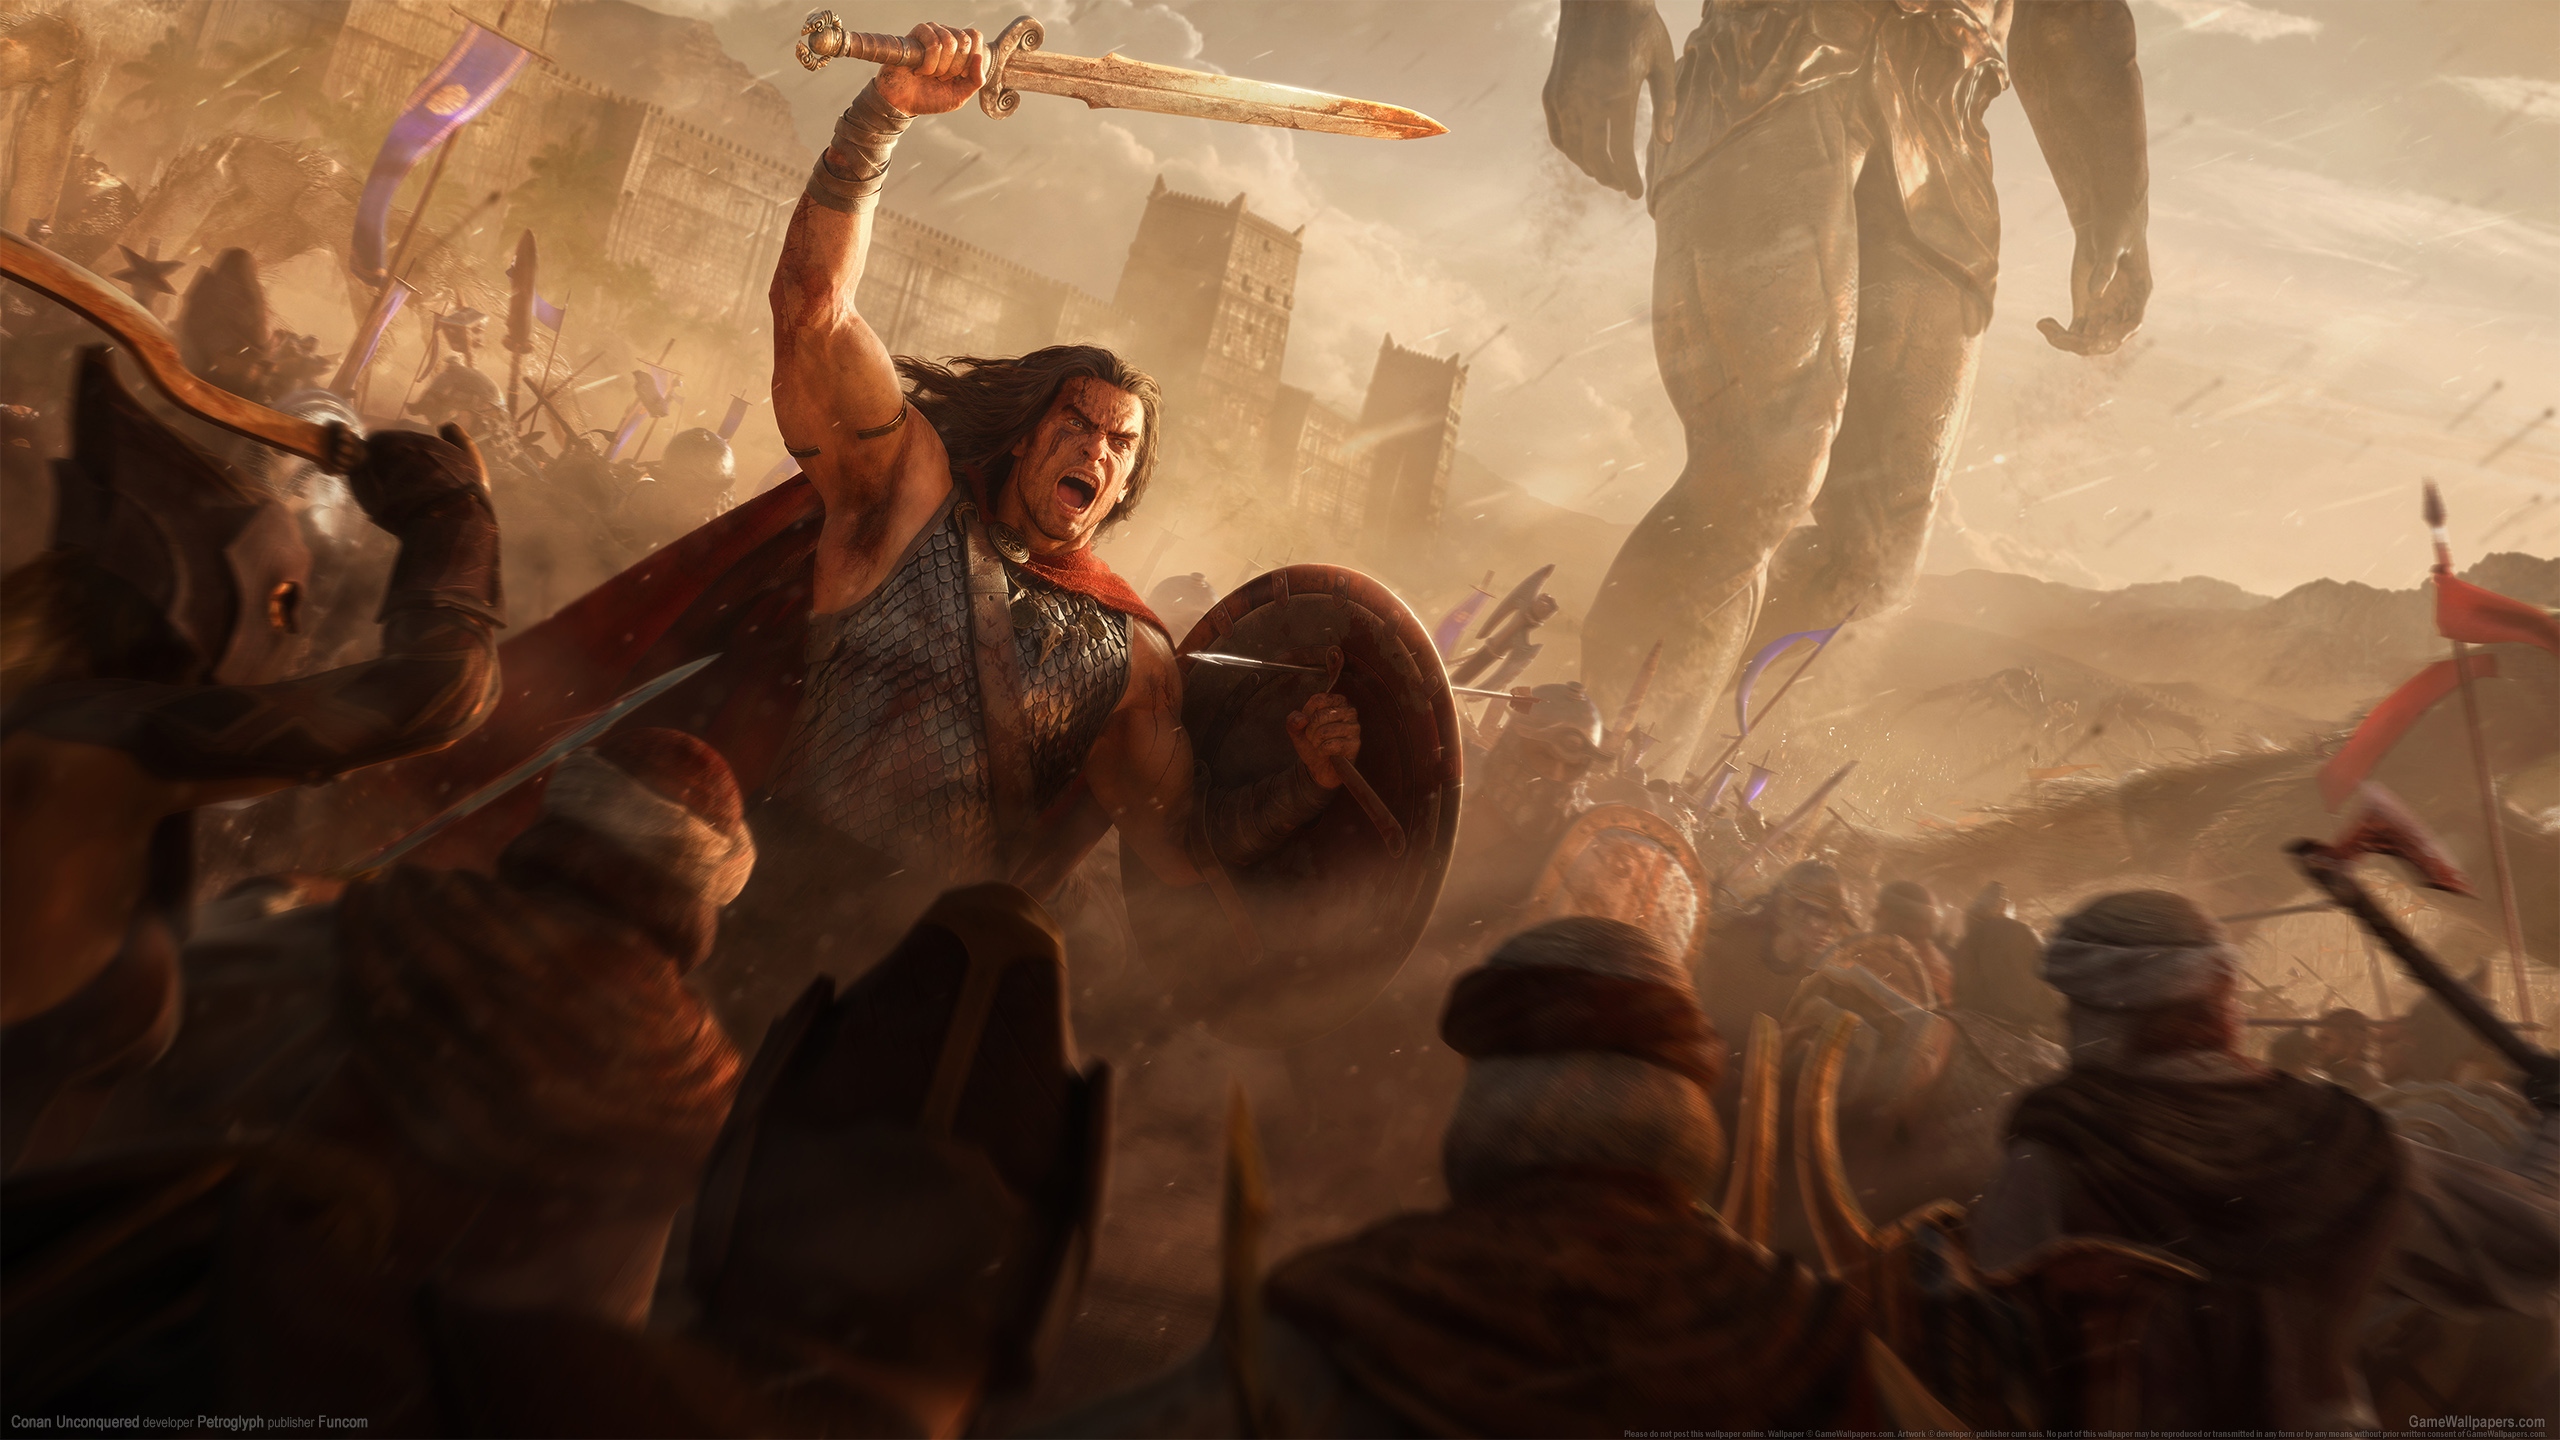 Conan Unconquered 2560x1440 wallpaper or background 01